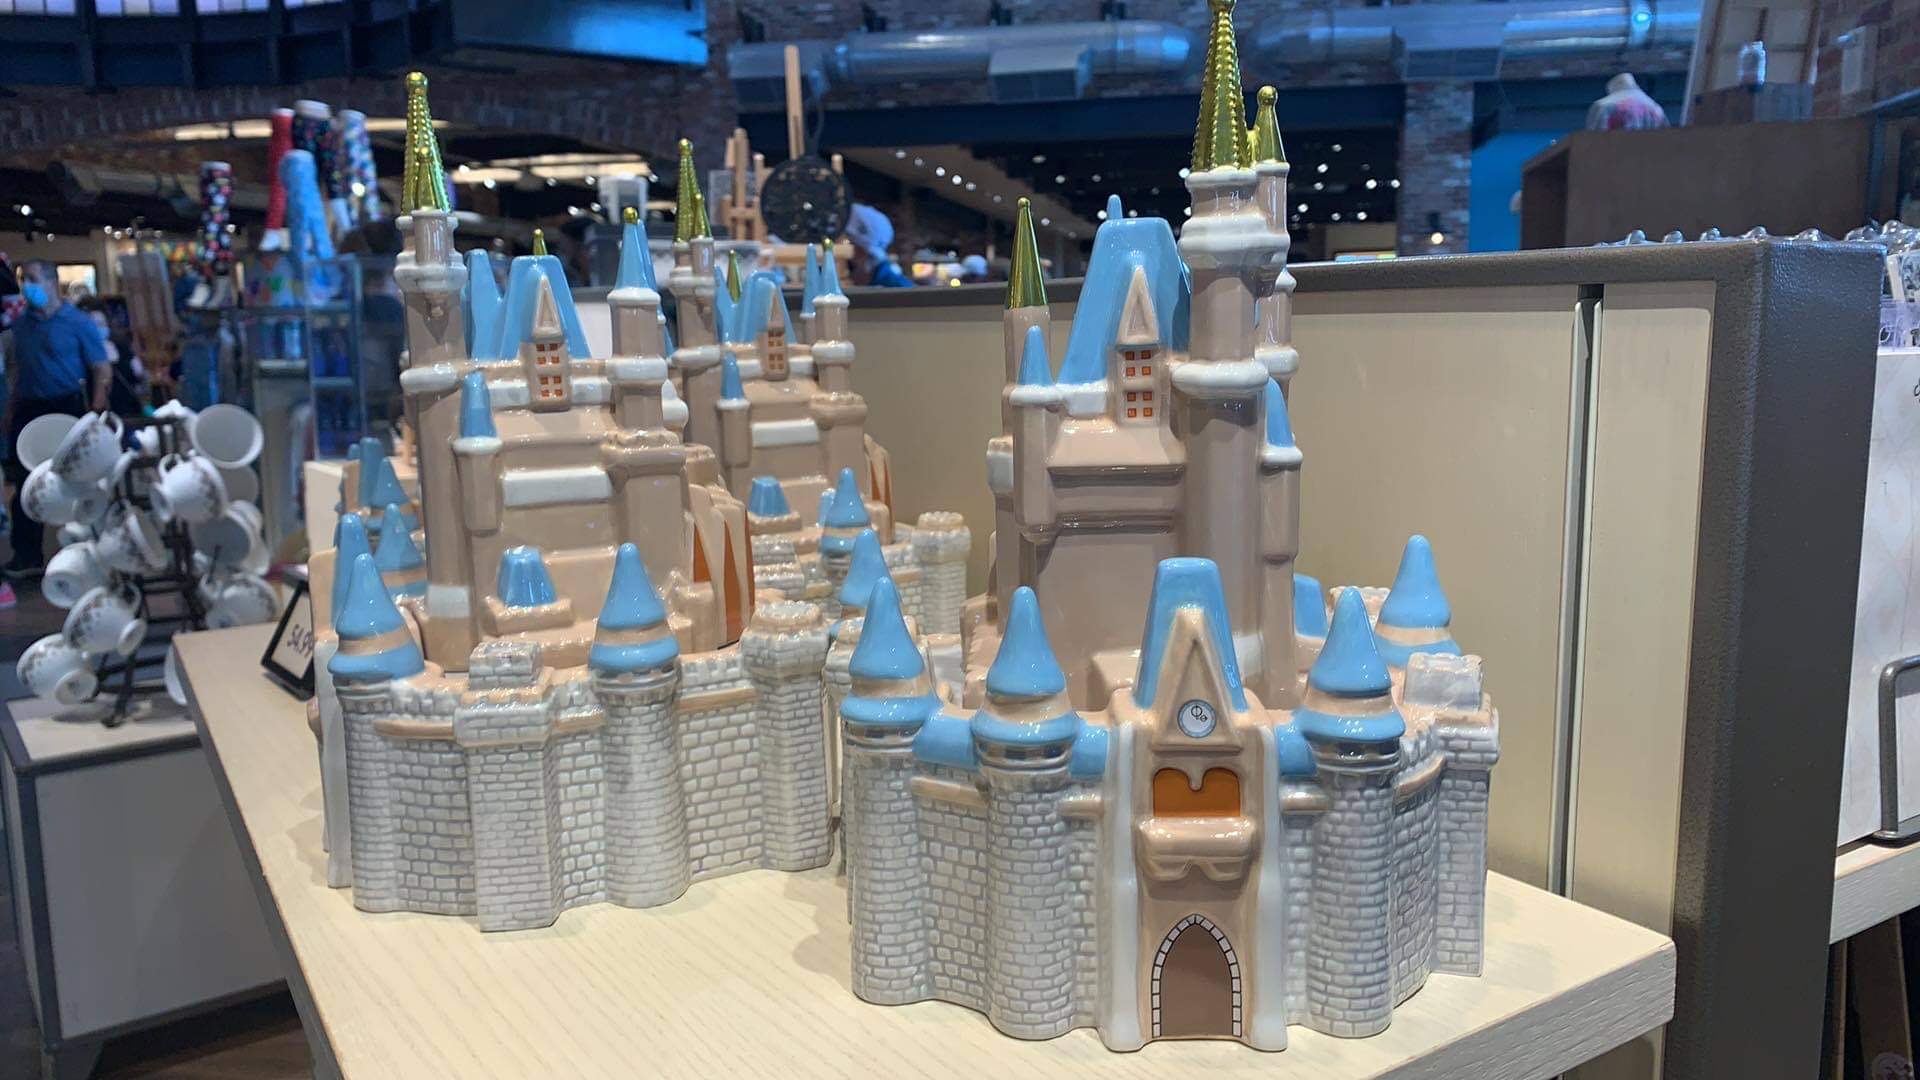 Take Home This Cinderella Castle Cookie Jar Now Available in Disney World